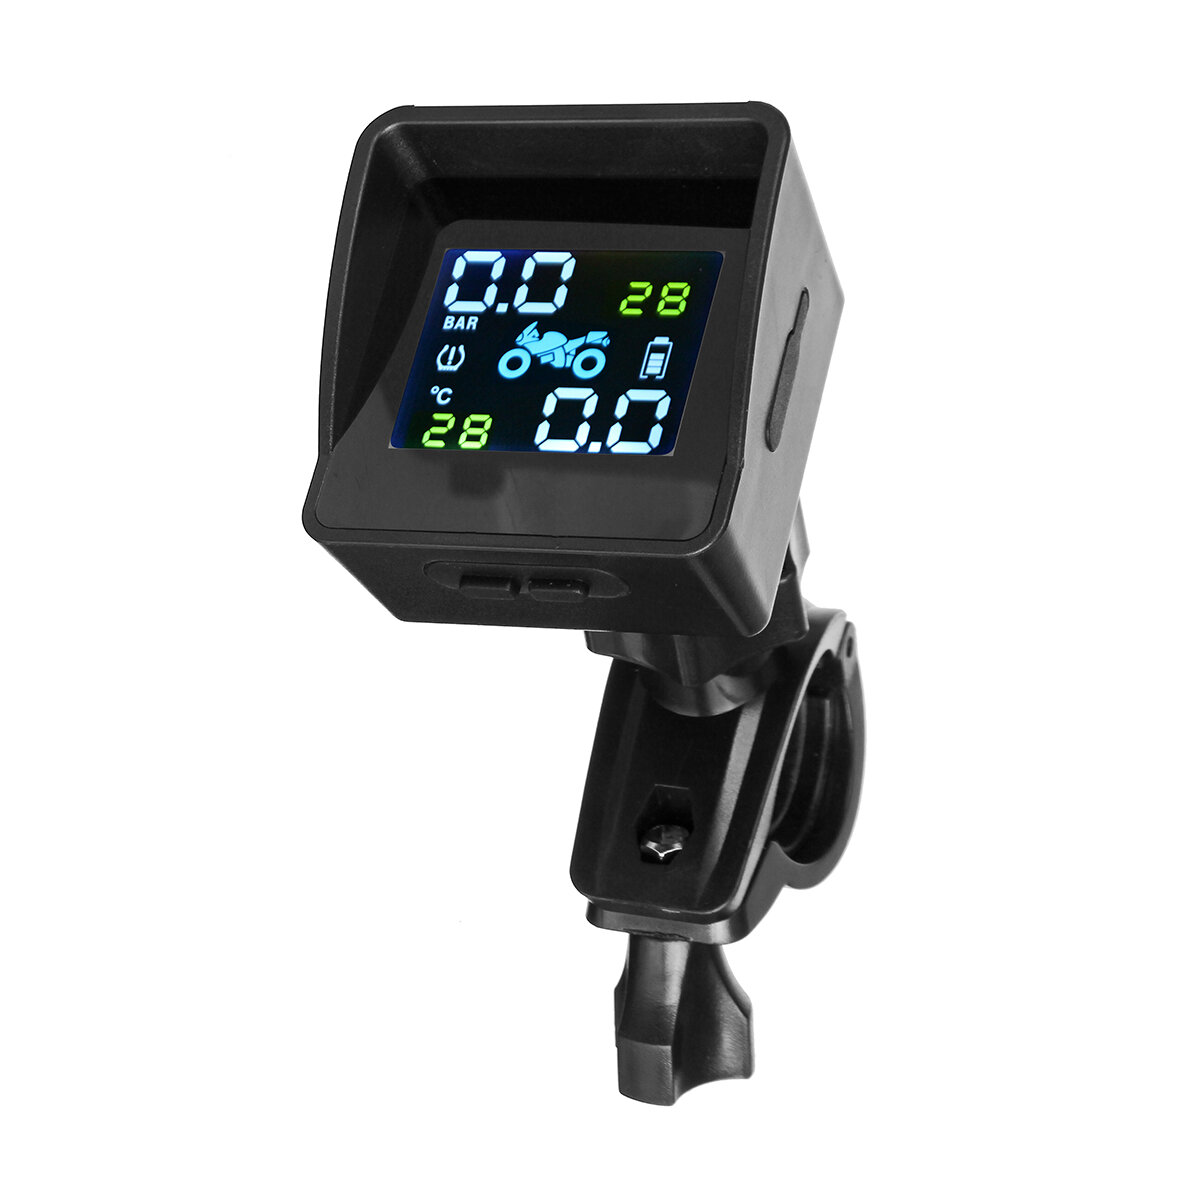 

Solar + USB TPMS Dual Mode 1100mAh Waterproof LCD Display Motorcycle Real Time Tire Pressure Monitor System Wireless Int